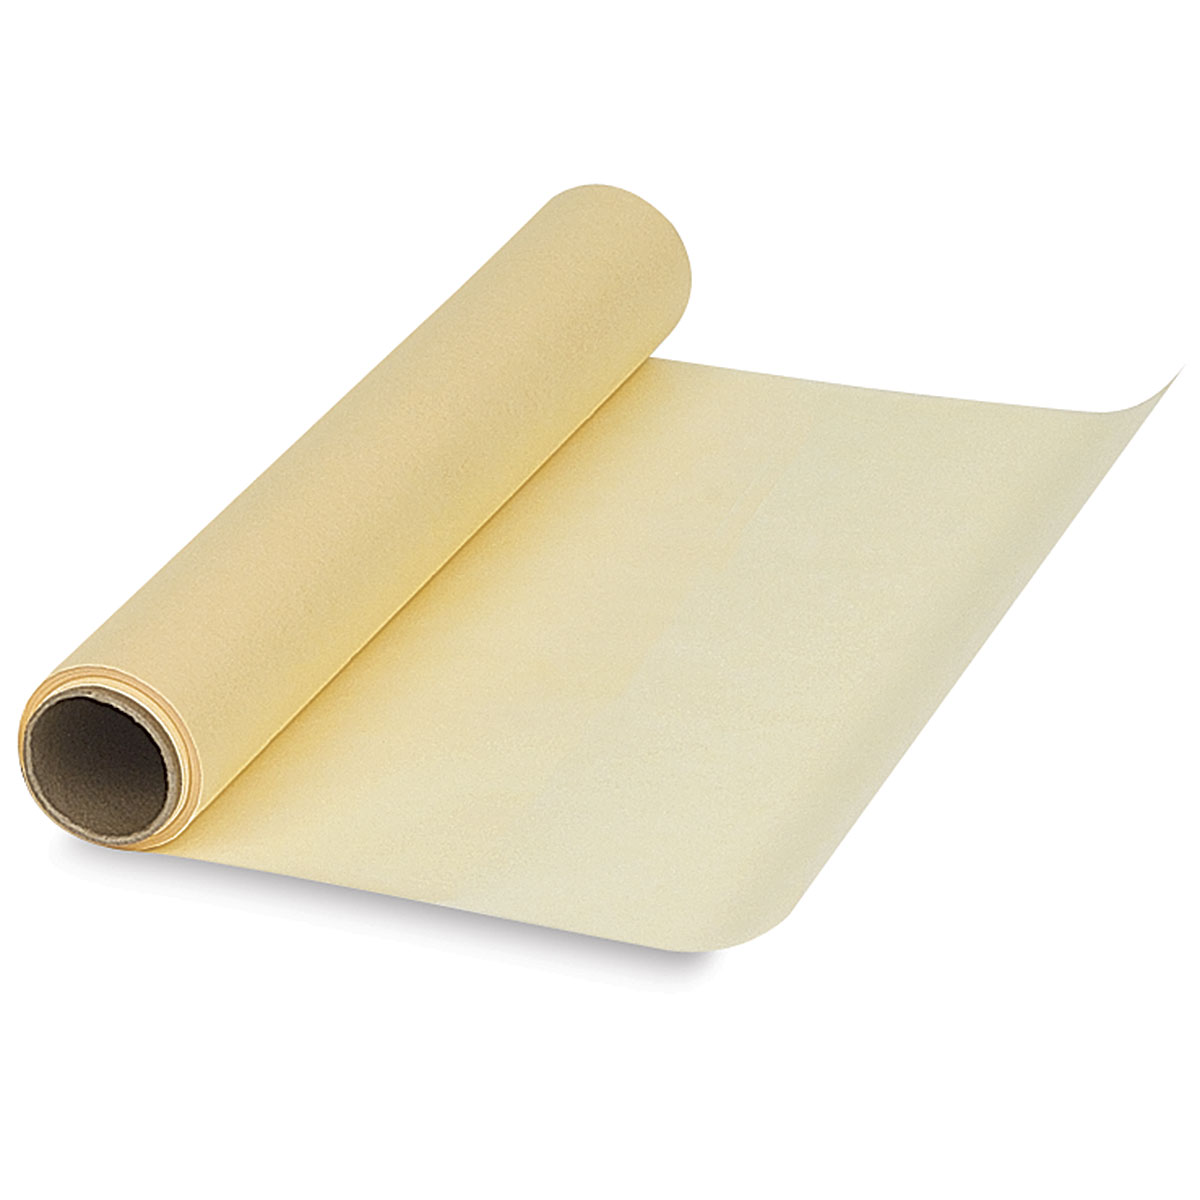 bienfang white sketch + trace paper roll no.106 – A Paper Hat